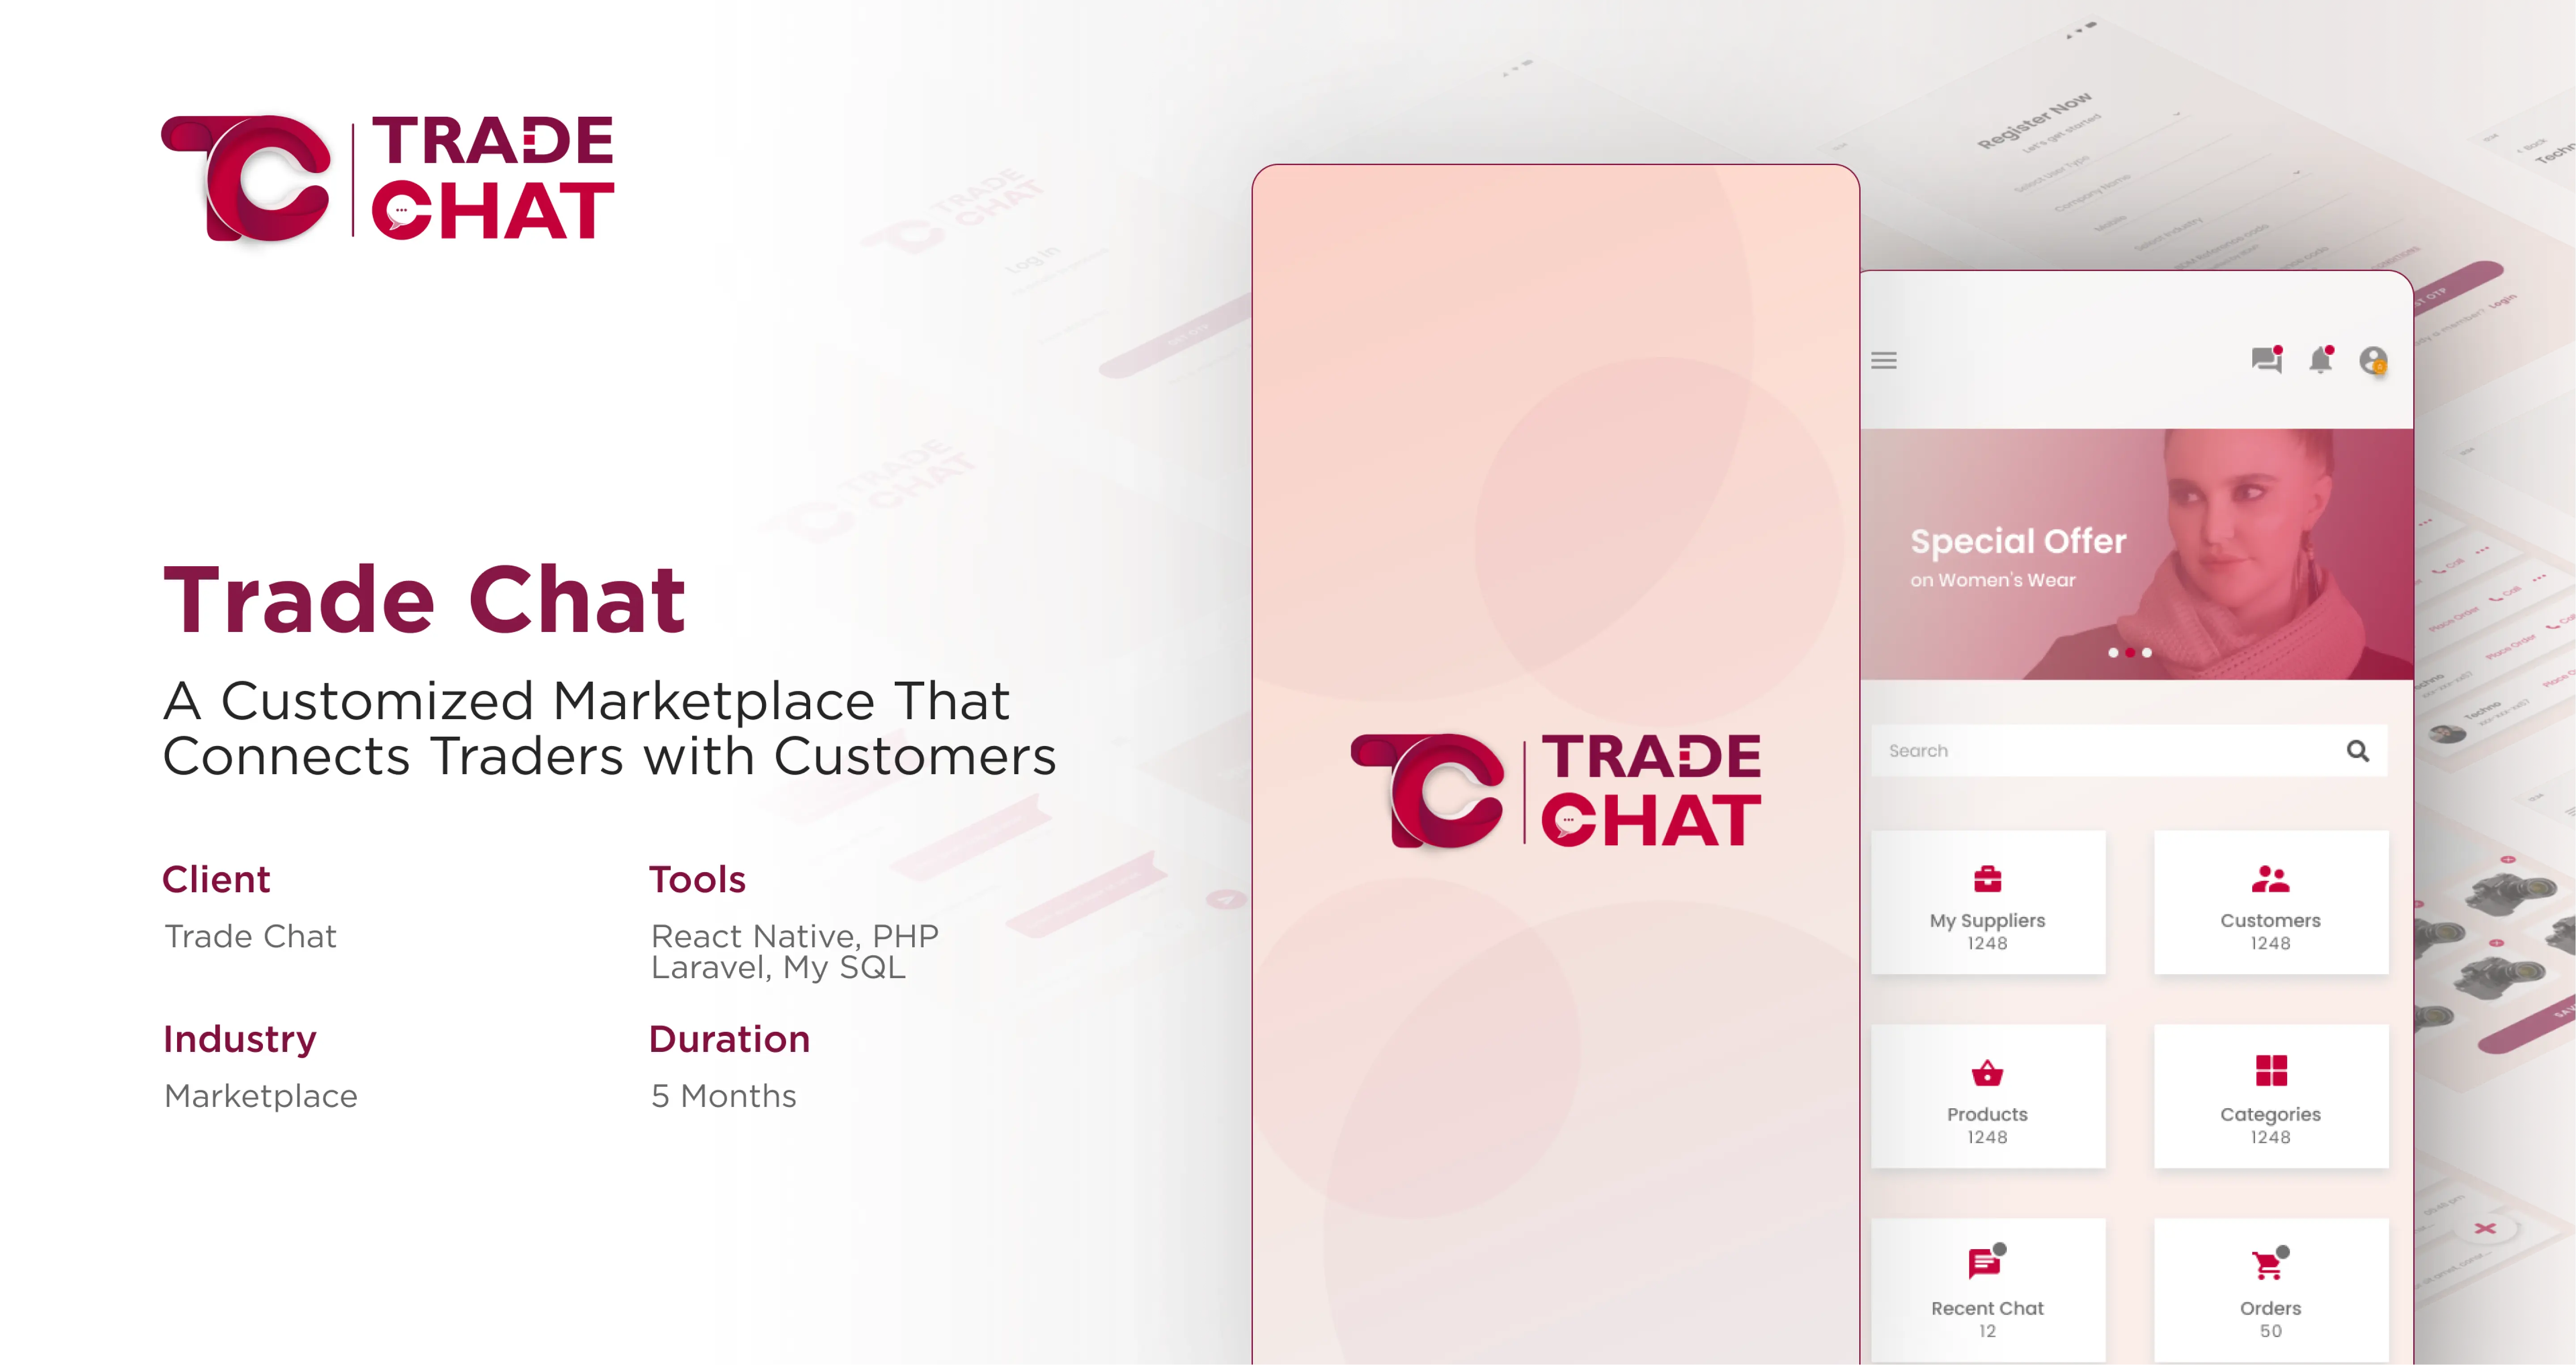 Android app development case study of a famous brand - Trade Chat